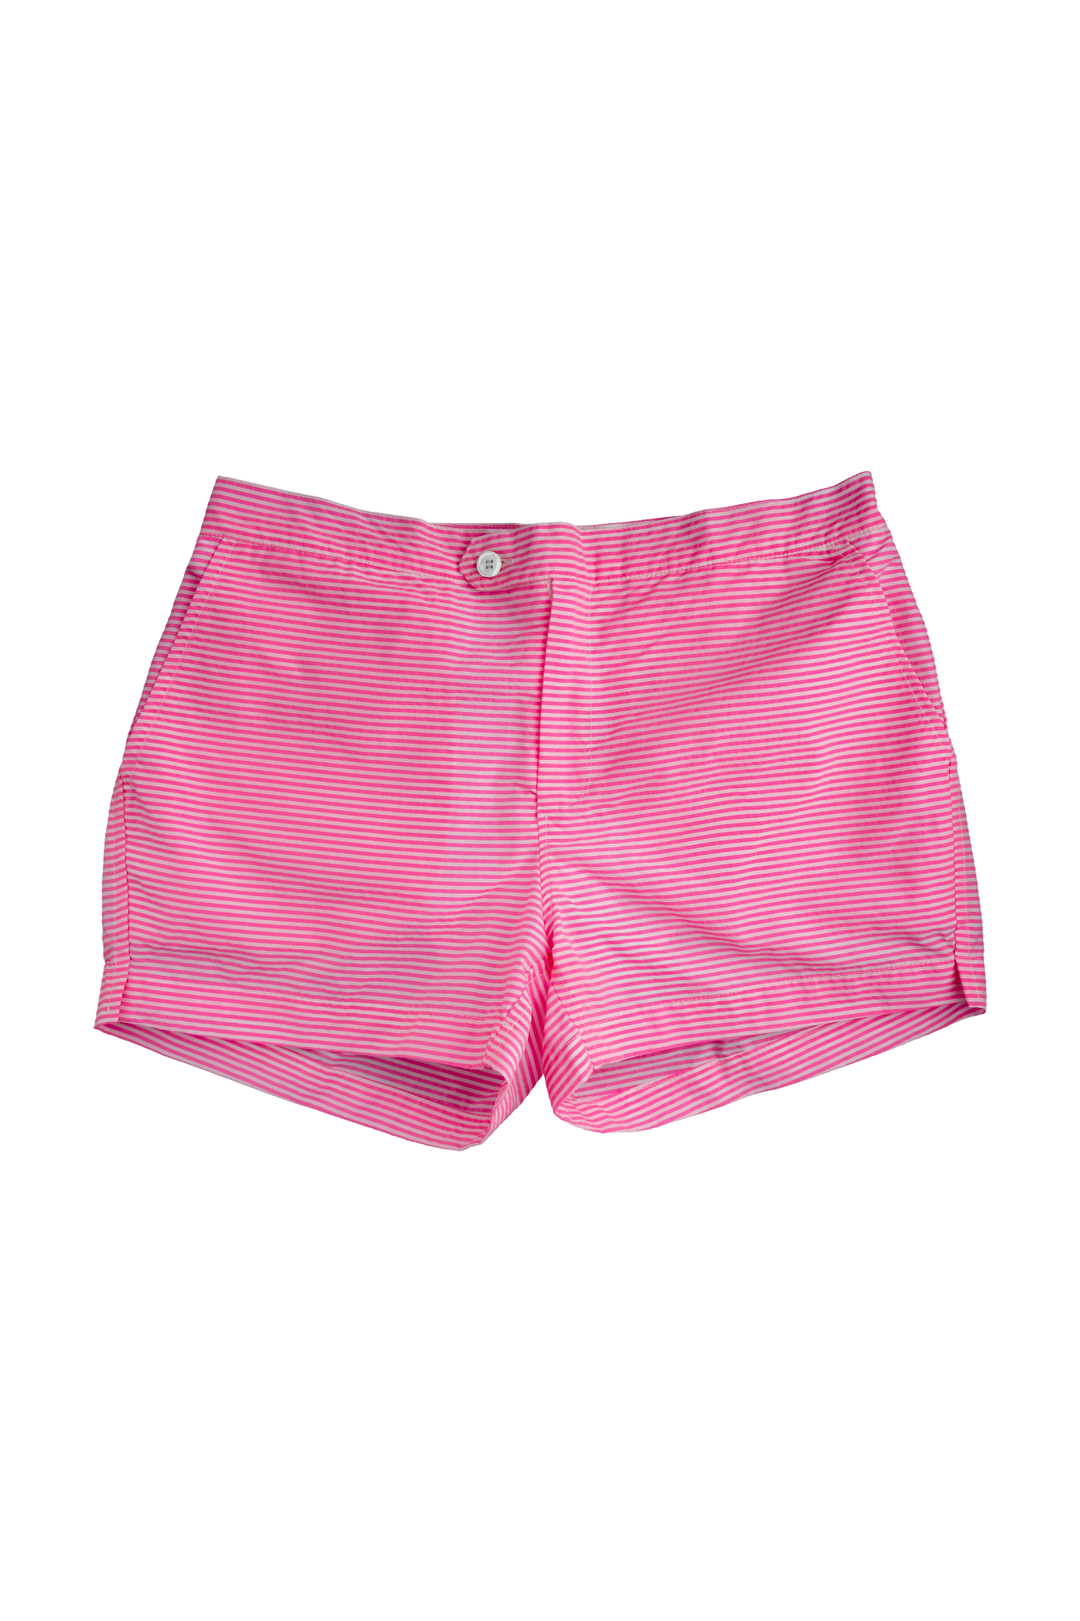 Pink striped women's shorts on white background